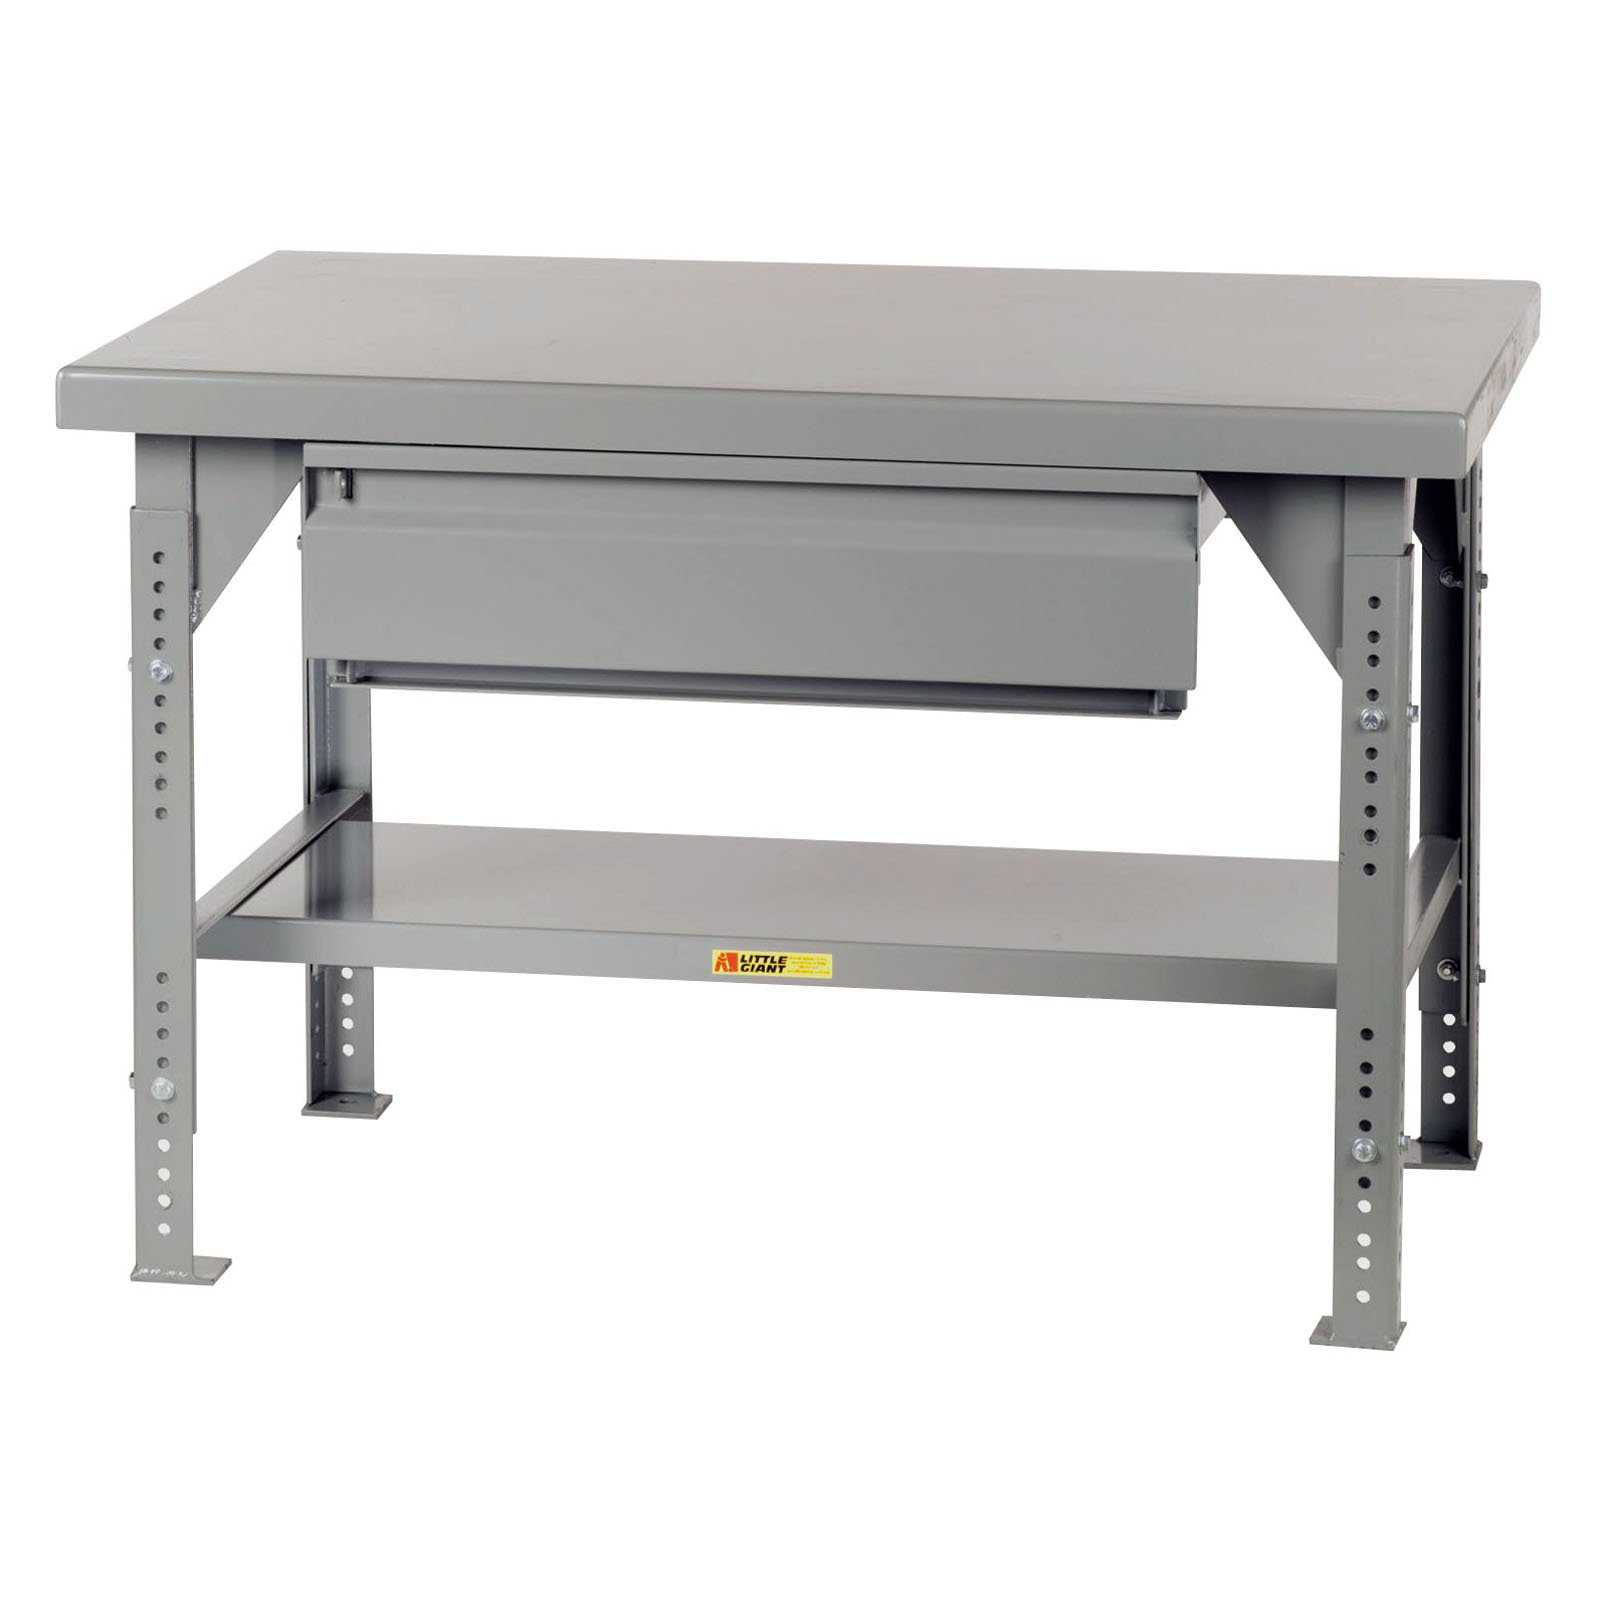 Little Giant Heavy-Duty Workbench with Drawer - Adjustable - 30 x 48 in.